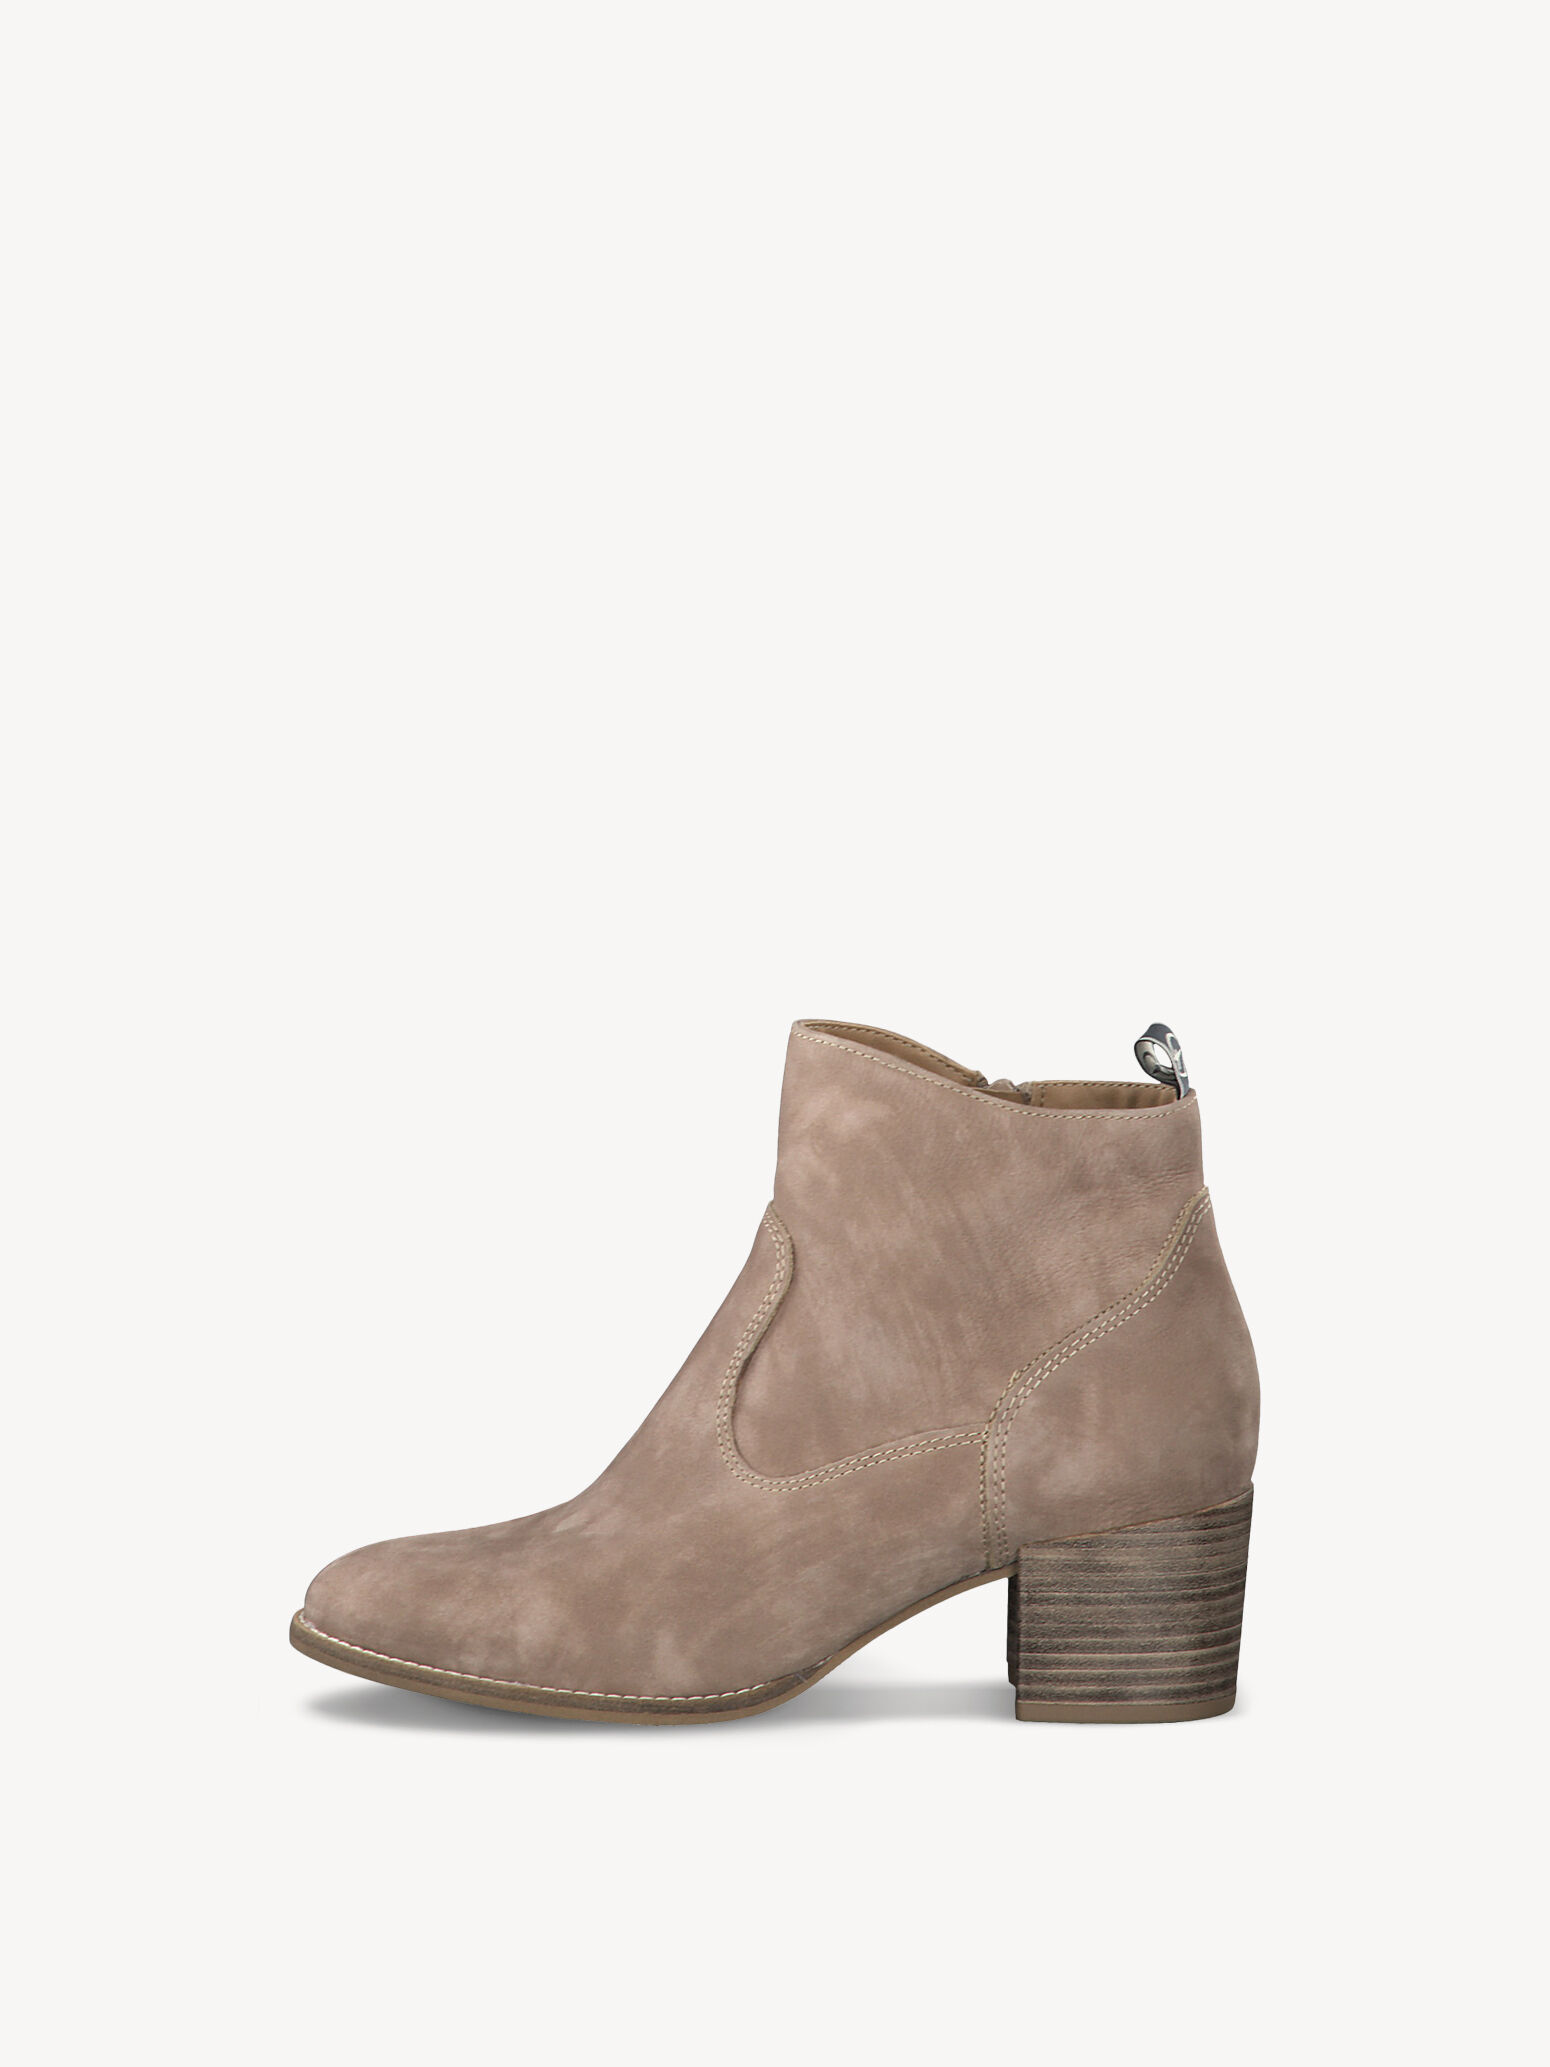 Leather Bootie 1-1-25350-24: Buy 